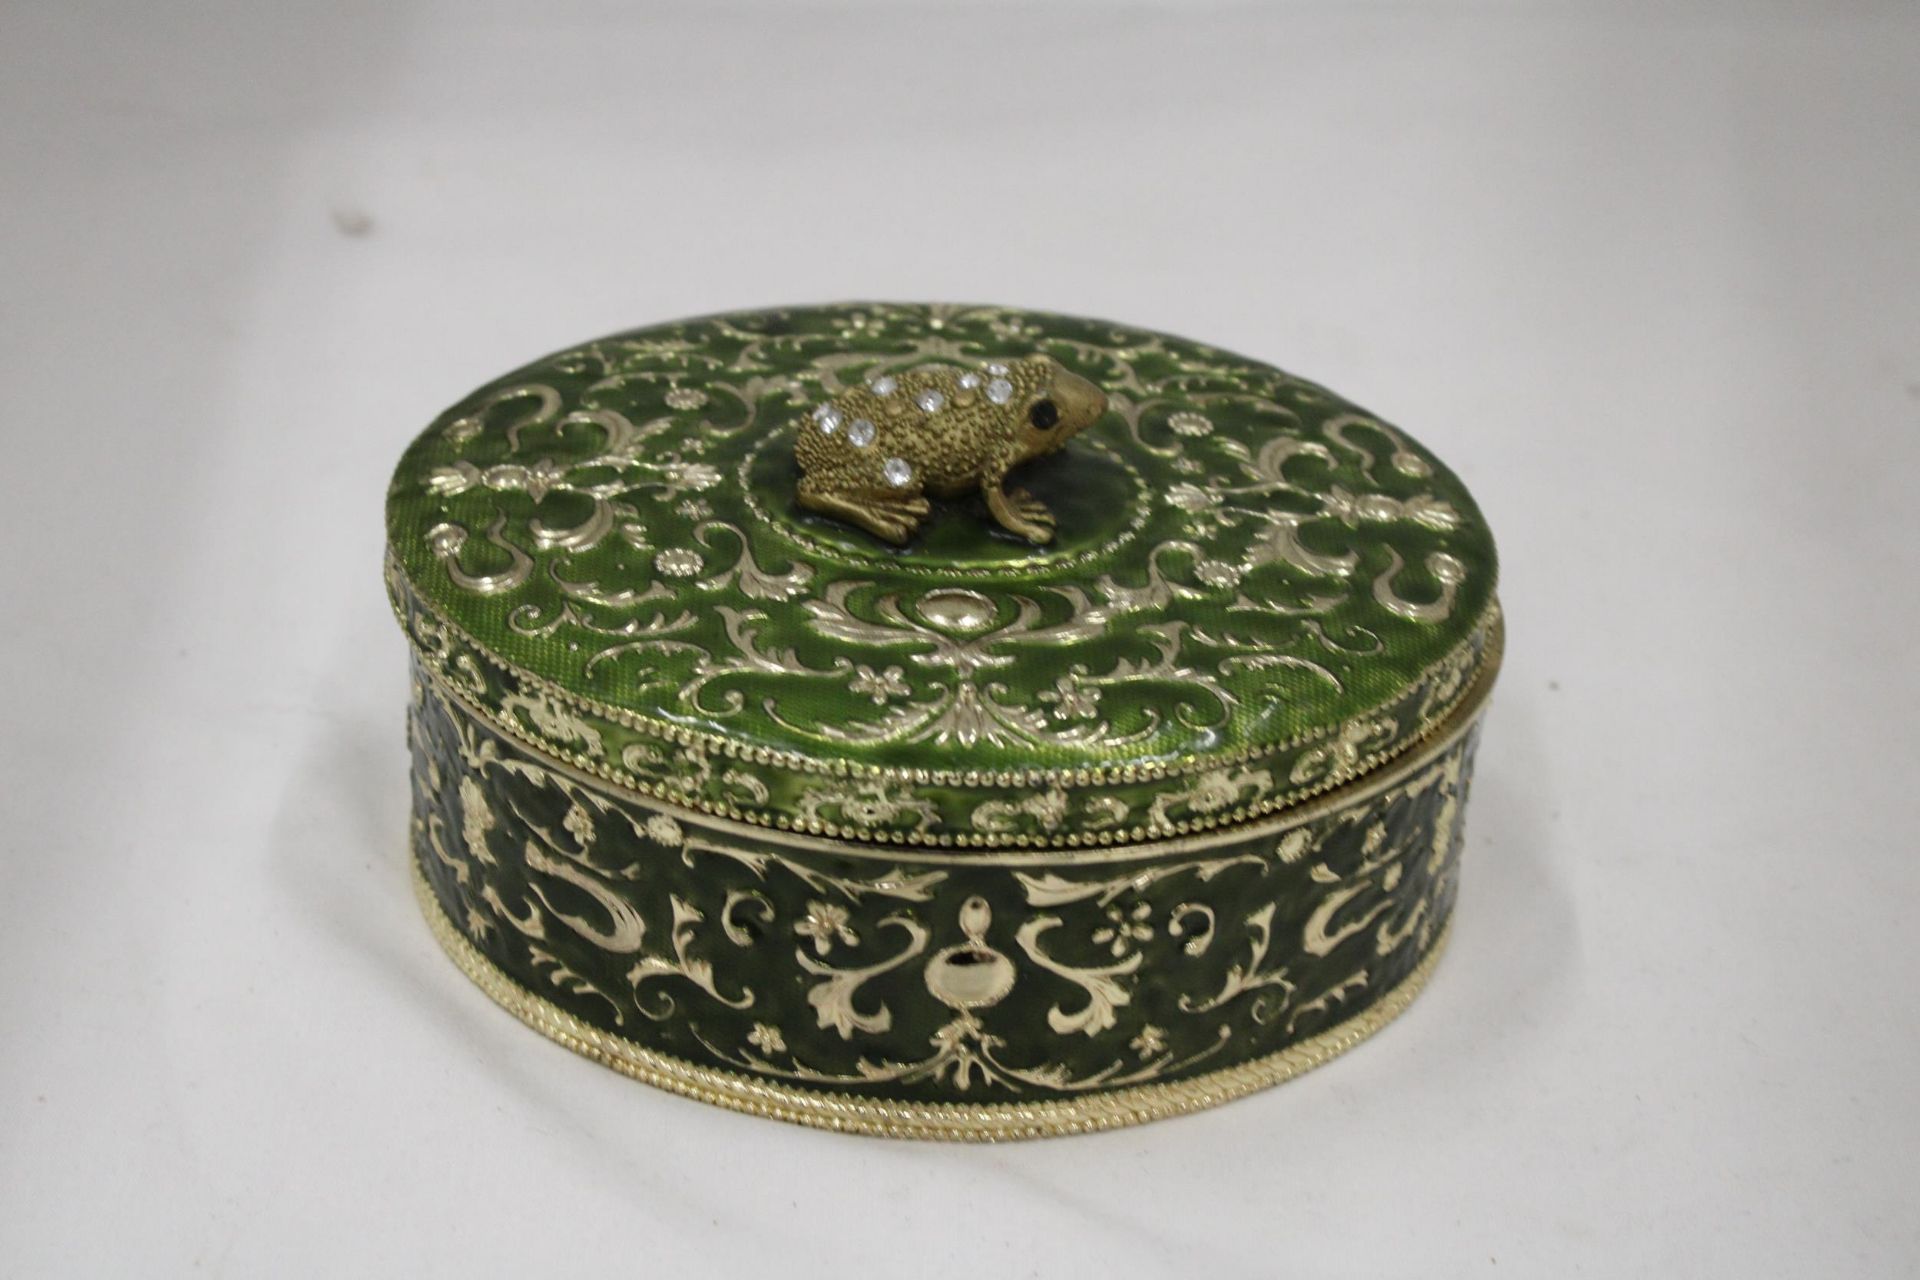 A GREEN ENAMELLED KEEPSAKE/JEWELLERY BOX WITH A JEWELLED FRONG ON THE LID, HEIGHT 8CM, DIAMETER, - Image 3 of 5